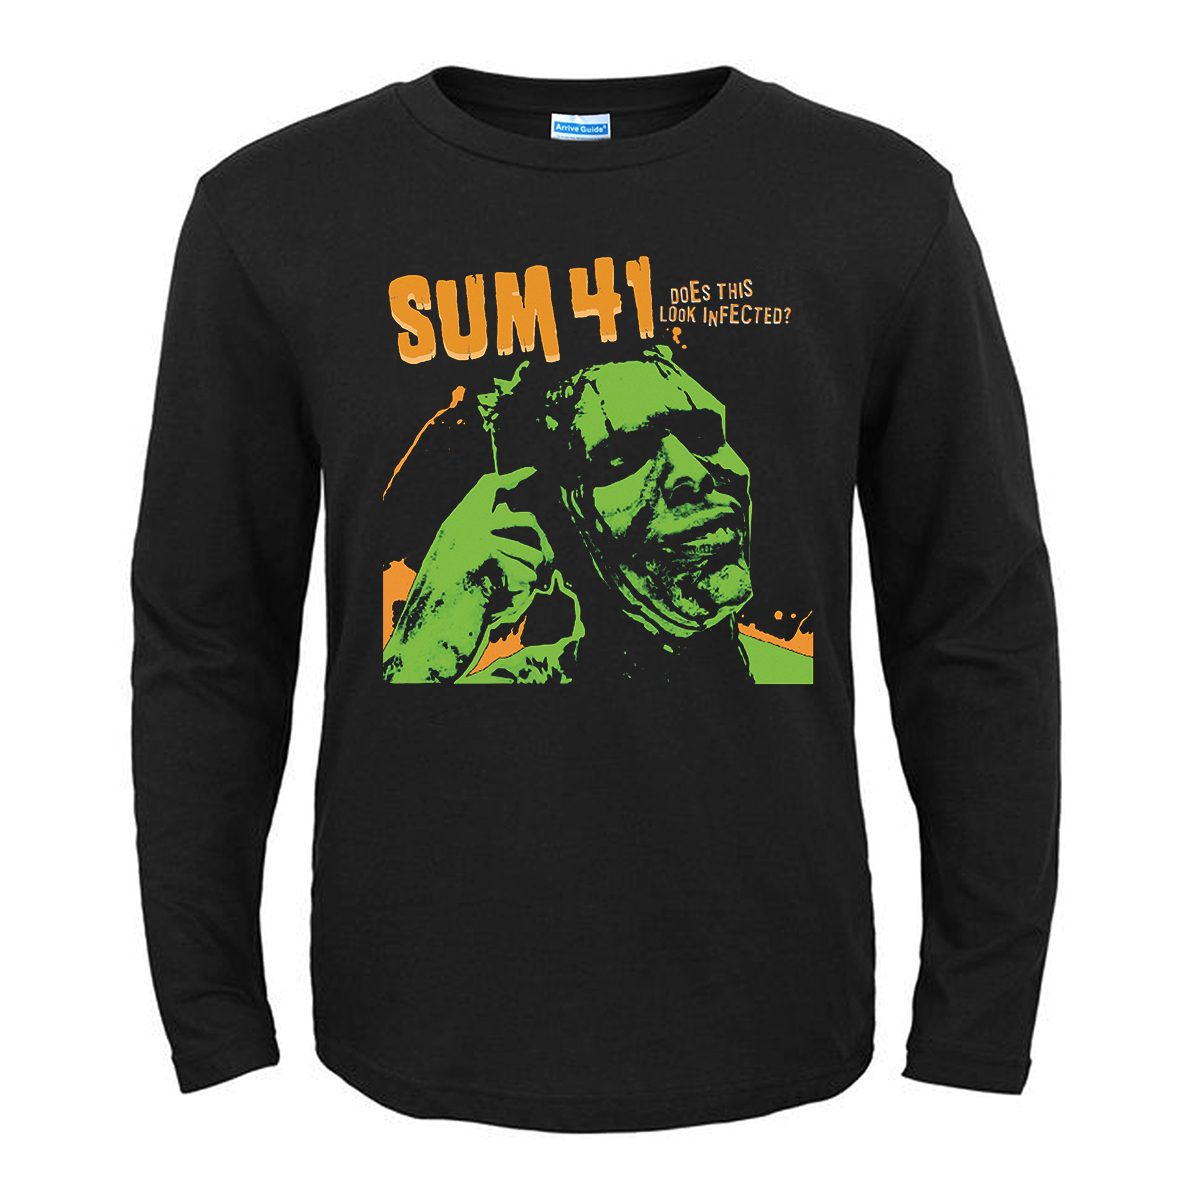 Collectibles T-Shirt Sum 41 Does This Look Infected?